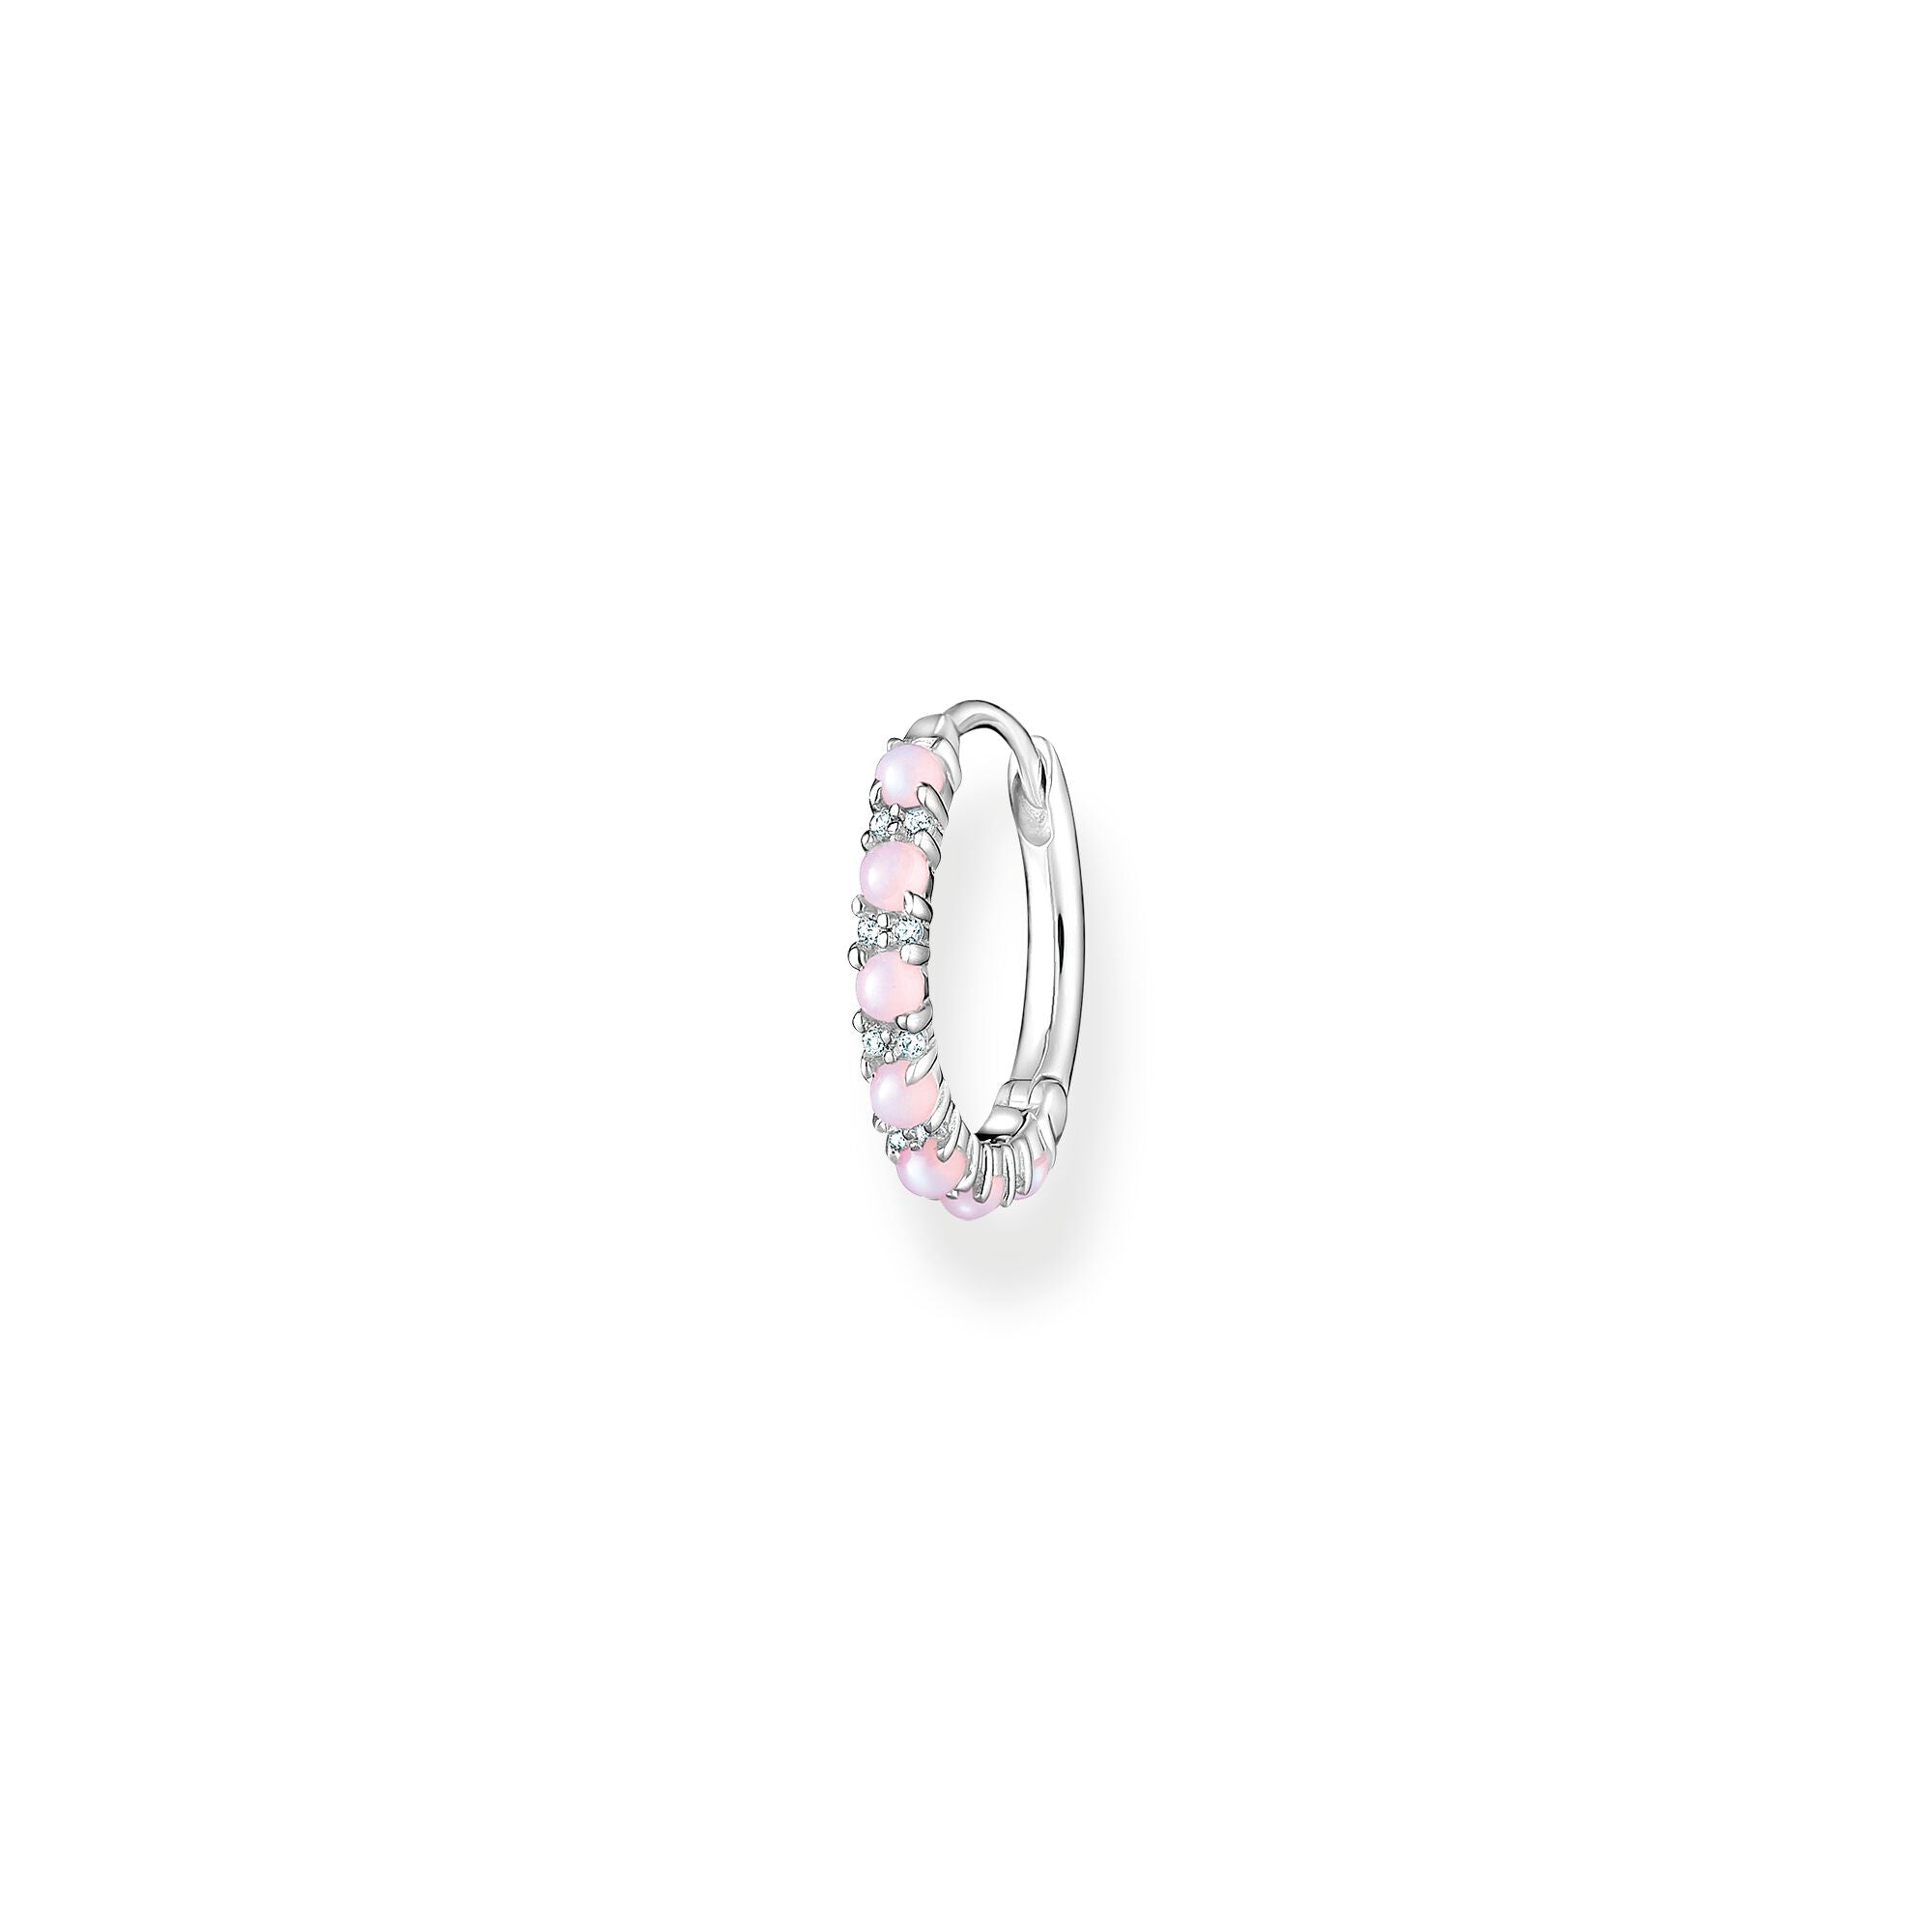 Thomas Sabo sterling silver and pink opal effect stones, single hoop earring